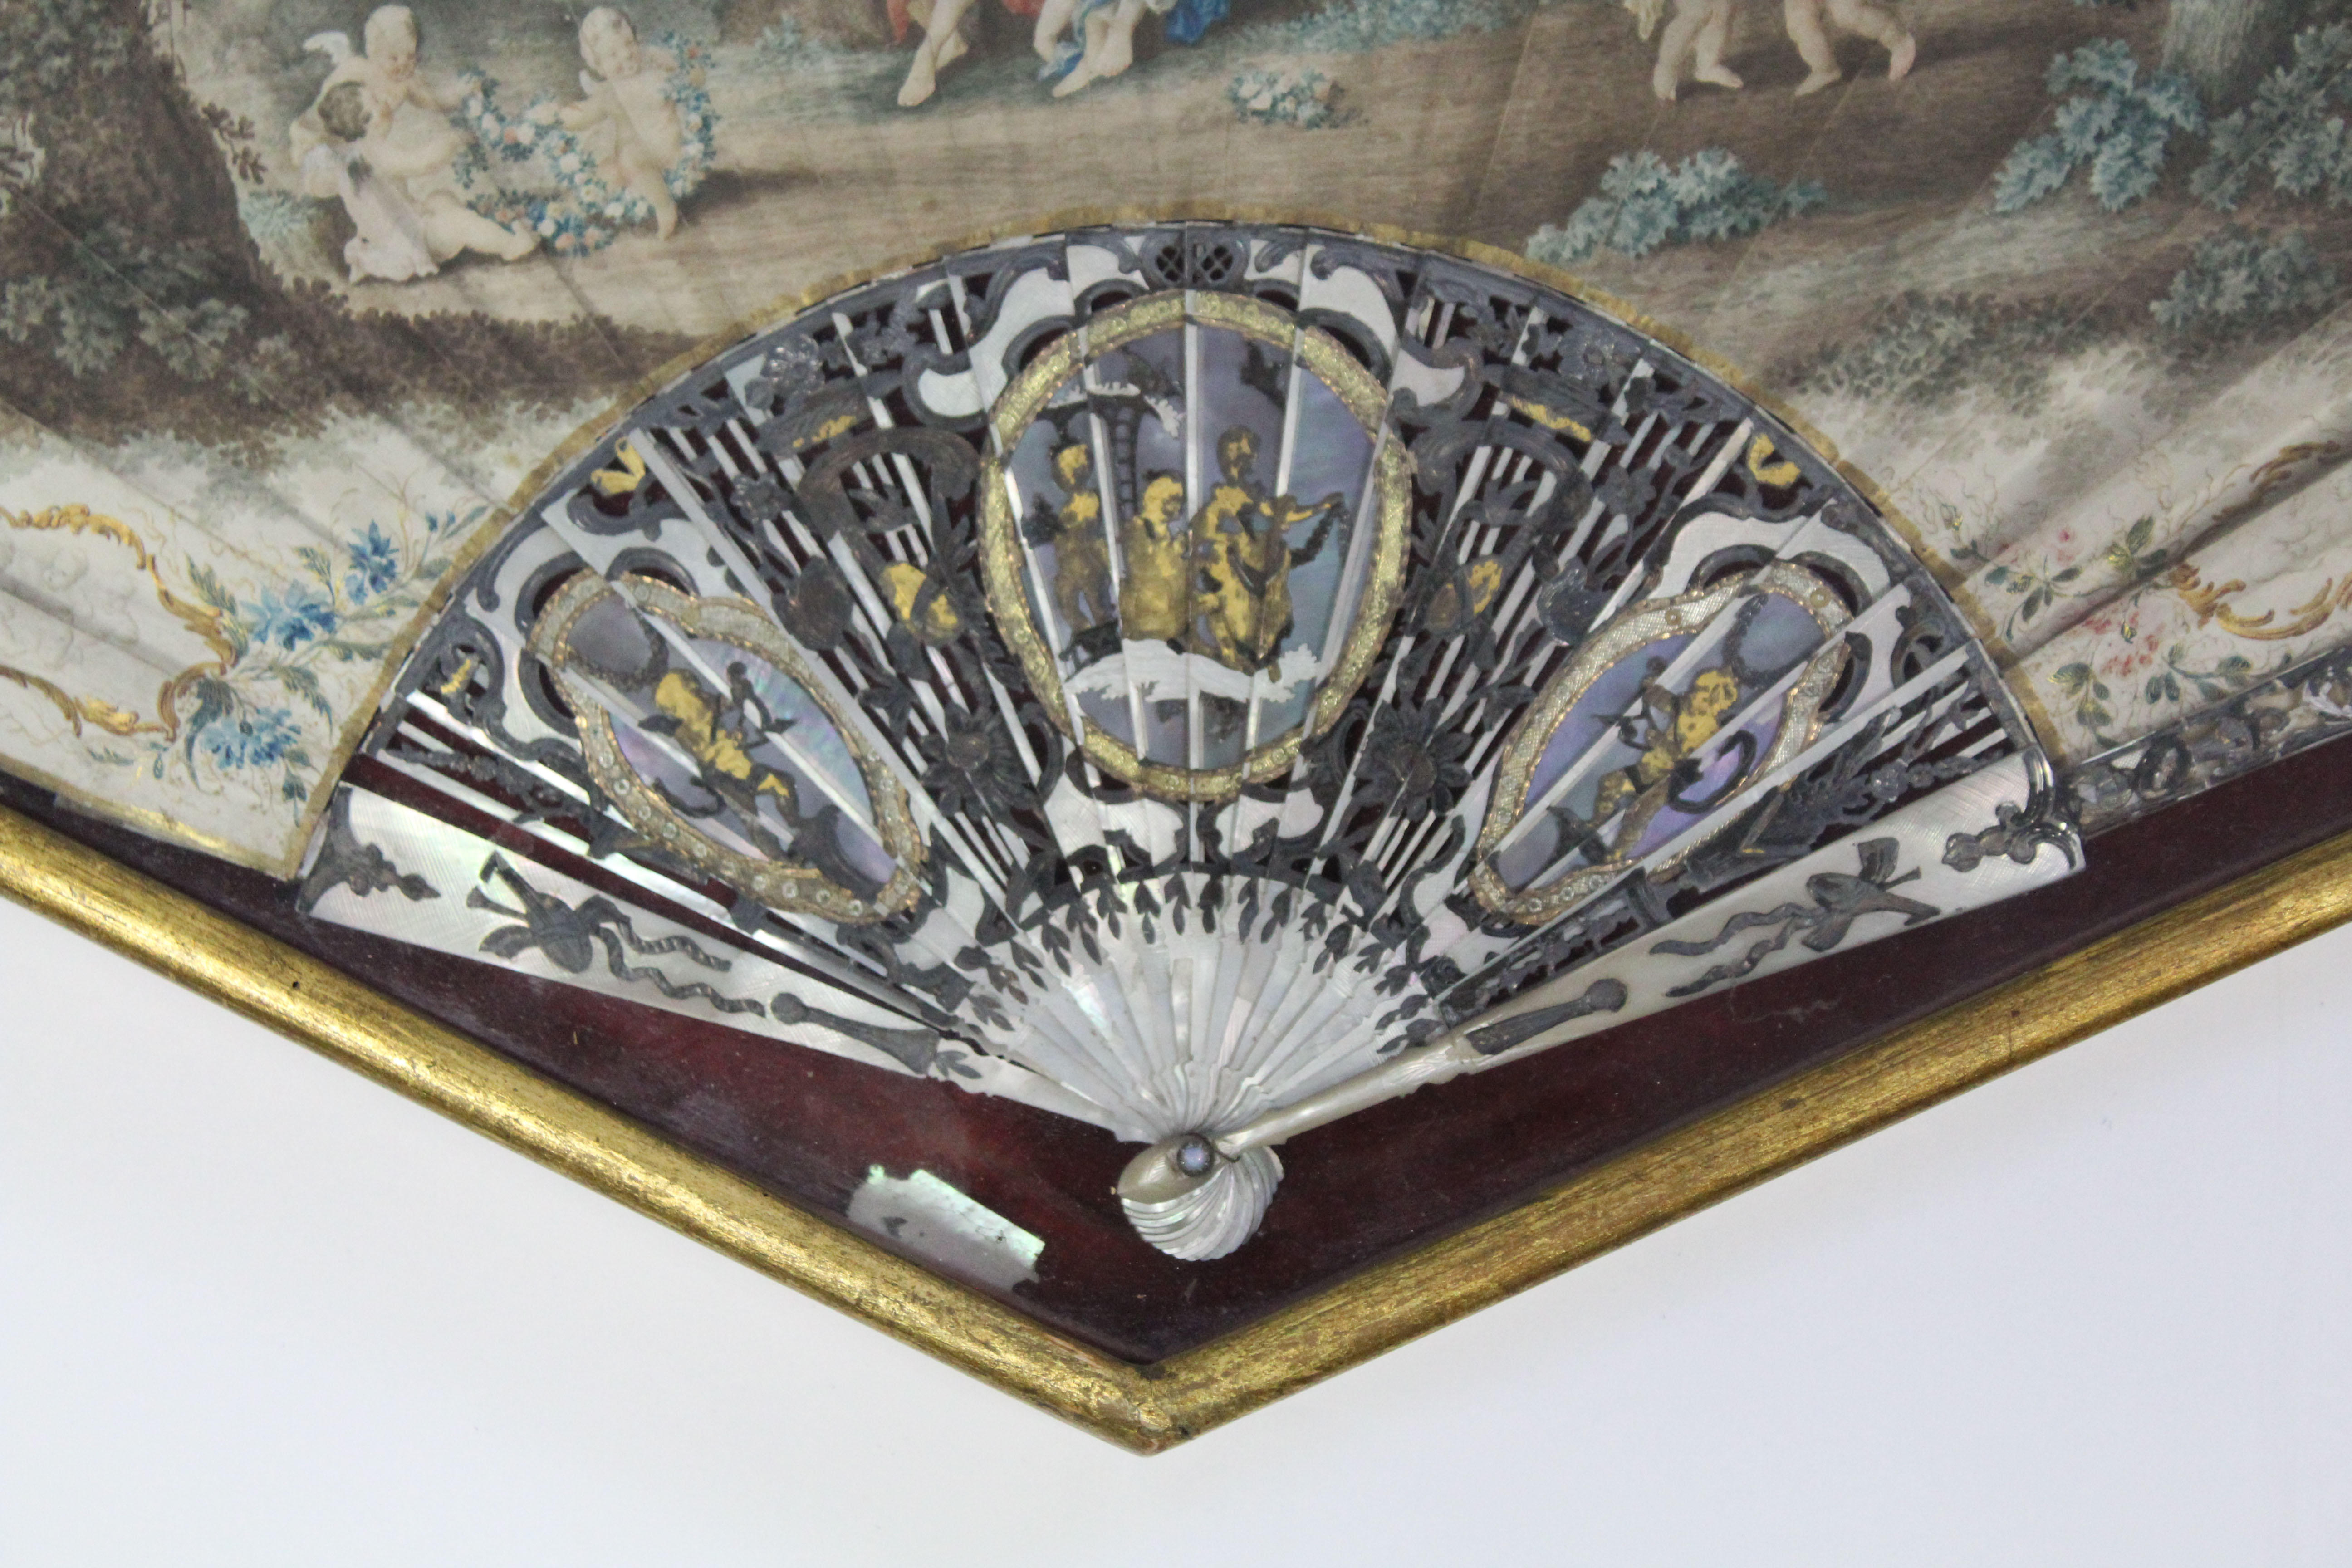 A LATE 18th century PAINTED FAN, decorated with a classical figure scene within a floral border, the - Image 4 of 5